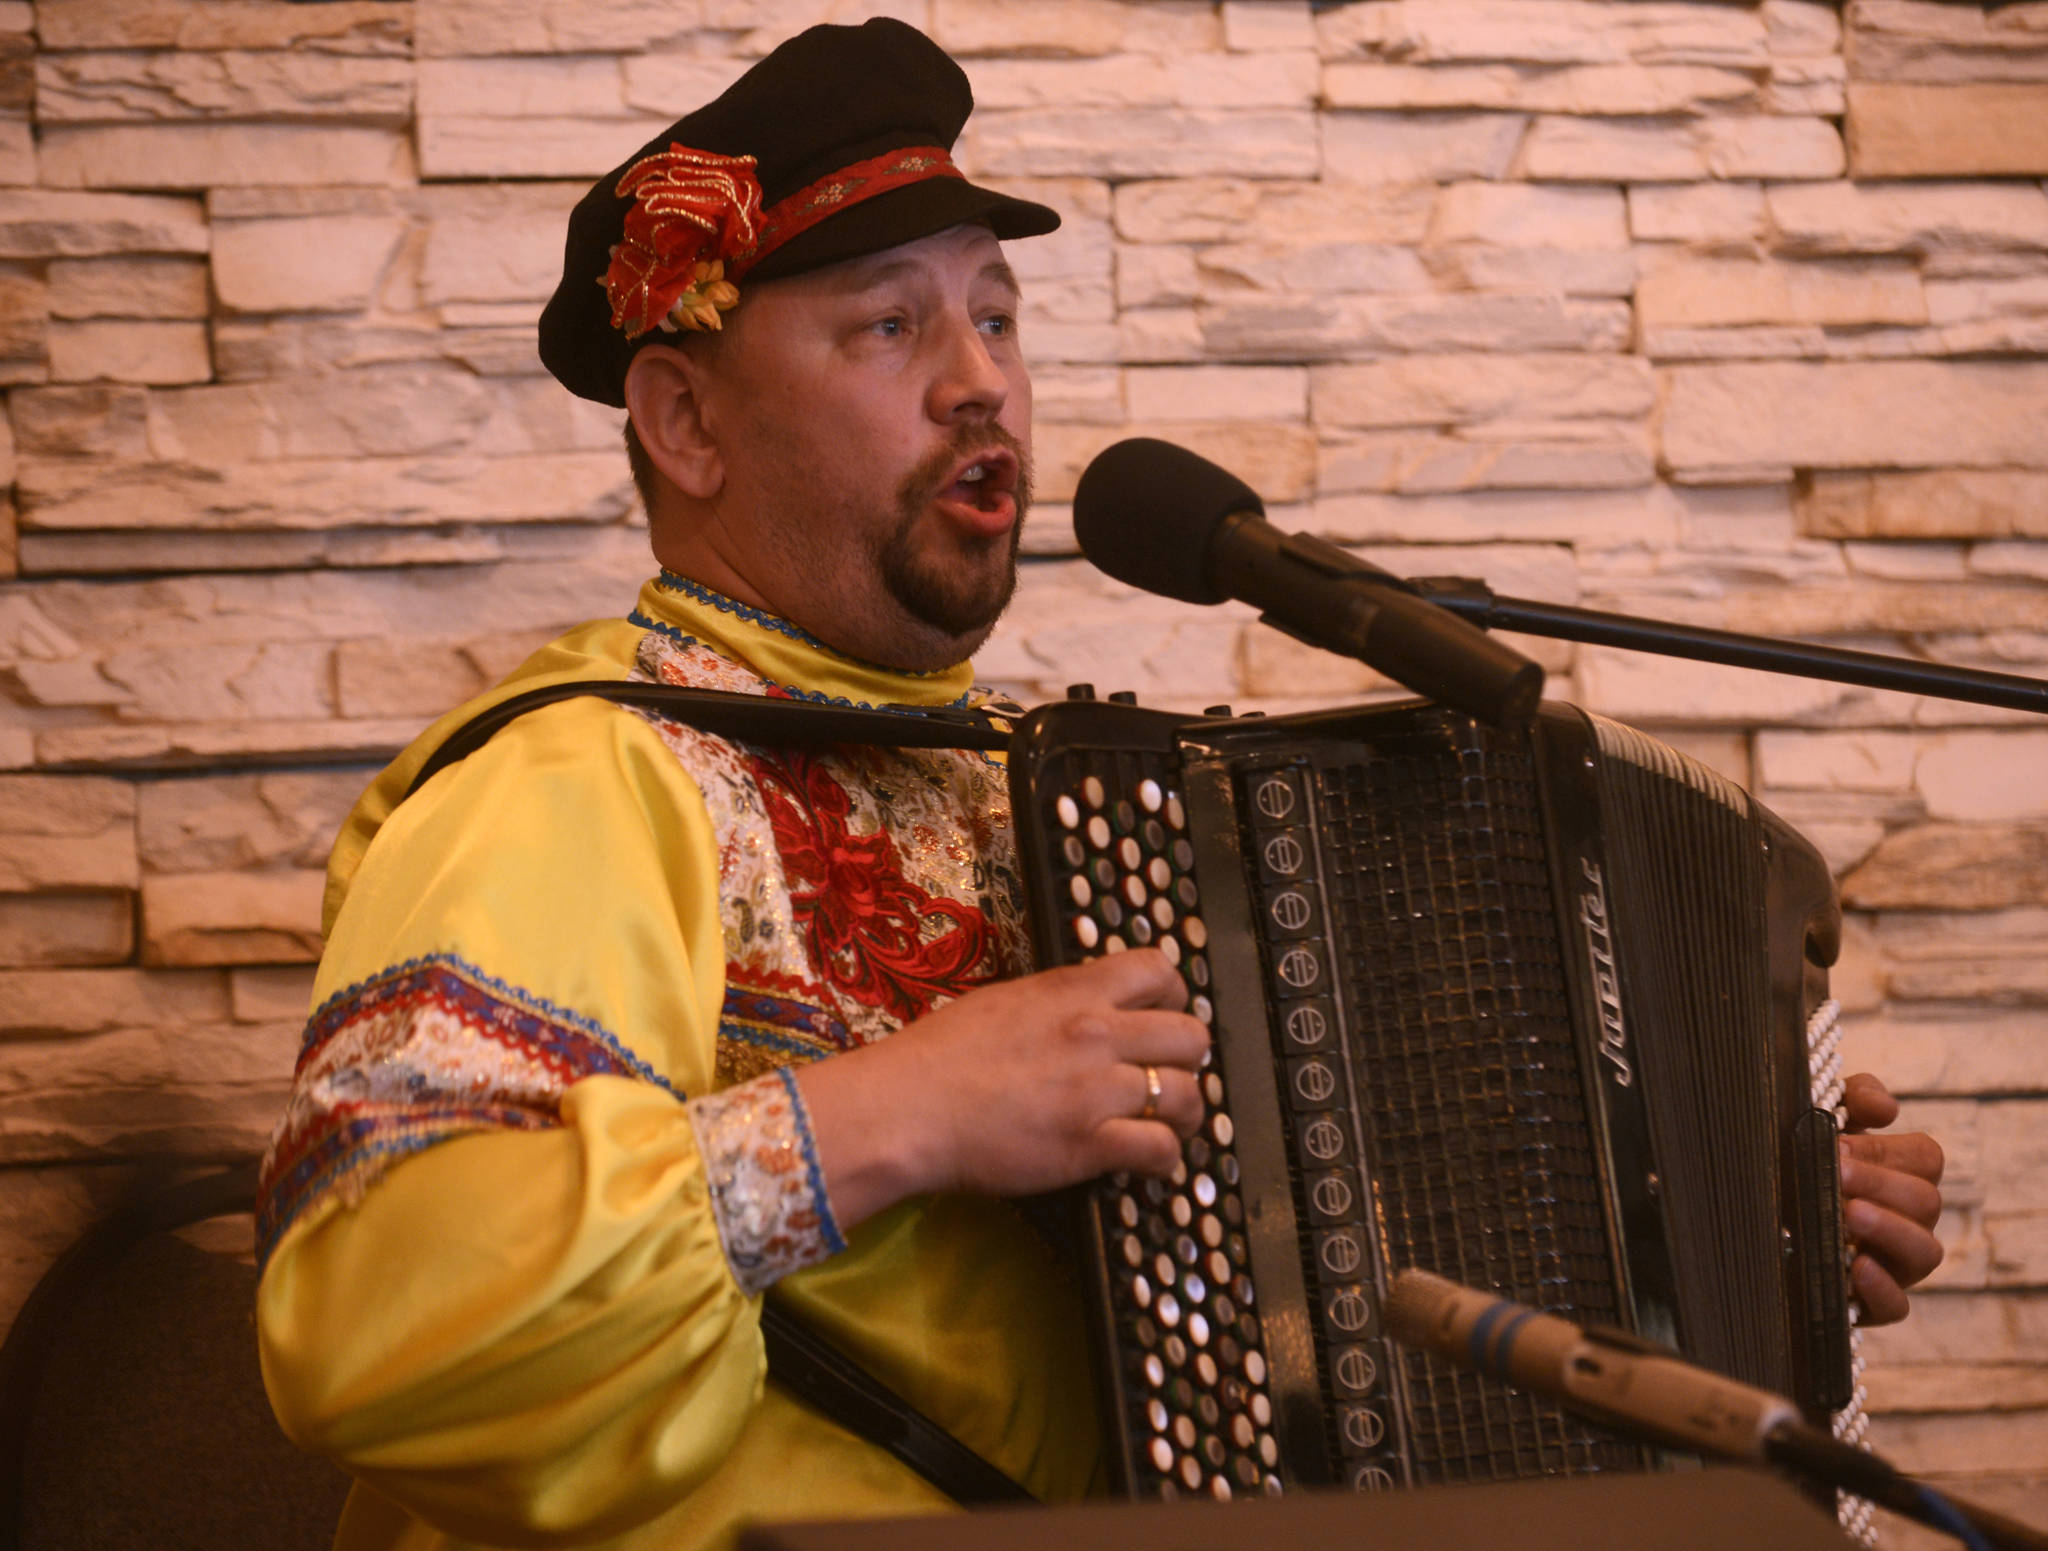 Yuri Shishkin of the Russian folk trio Moscow Nights plays the traditional Russian three-stringed balalaika, with bandmate Boris Bezrodnov on the bass version, on Friday, April 21, 2017 at Alaska Christian College near Soldotna, Alaska. With accordionist Vitali Bezrodnov, the group played for attendees at a Kenai Peninsula History Conference held on the 150th anniversary of Russia’s 1867 sale of Alaska to the United States. (Ben Boettger/Peninsula Clarion)